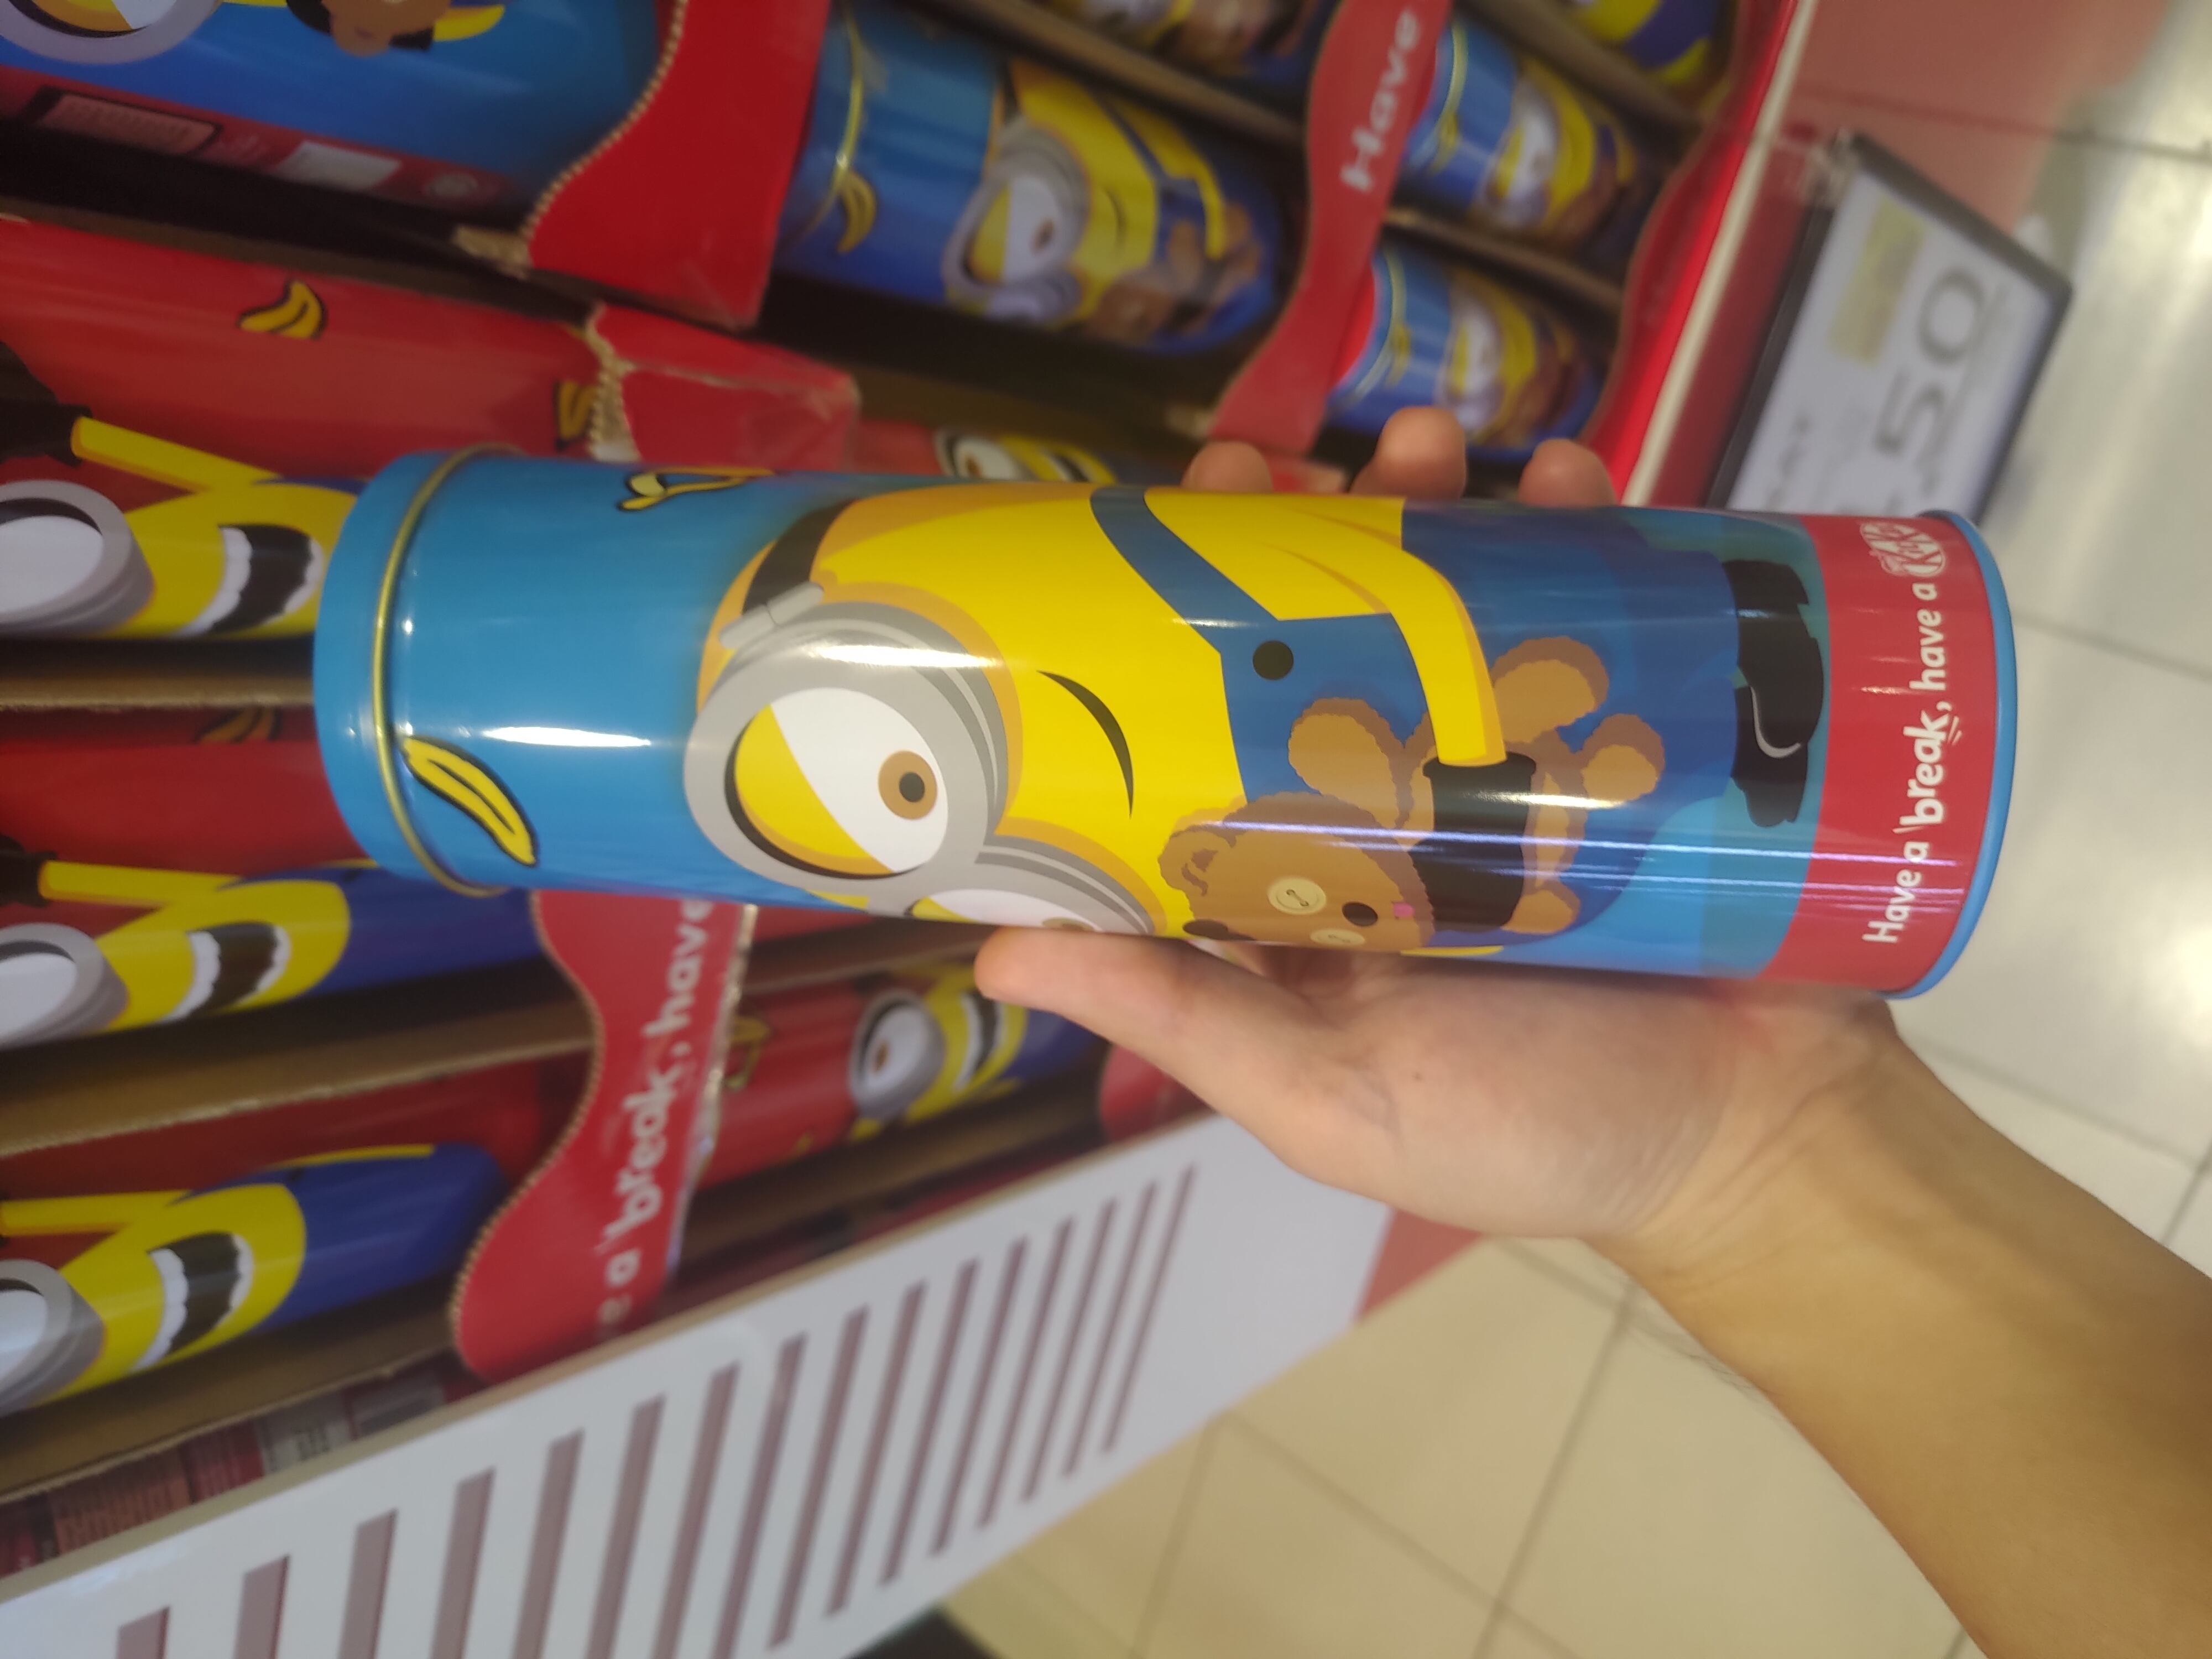 Free Limited Edition Minion Cooler Bag when you purchase Kit Kat at FairPrice - 13